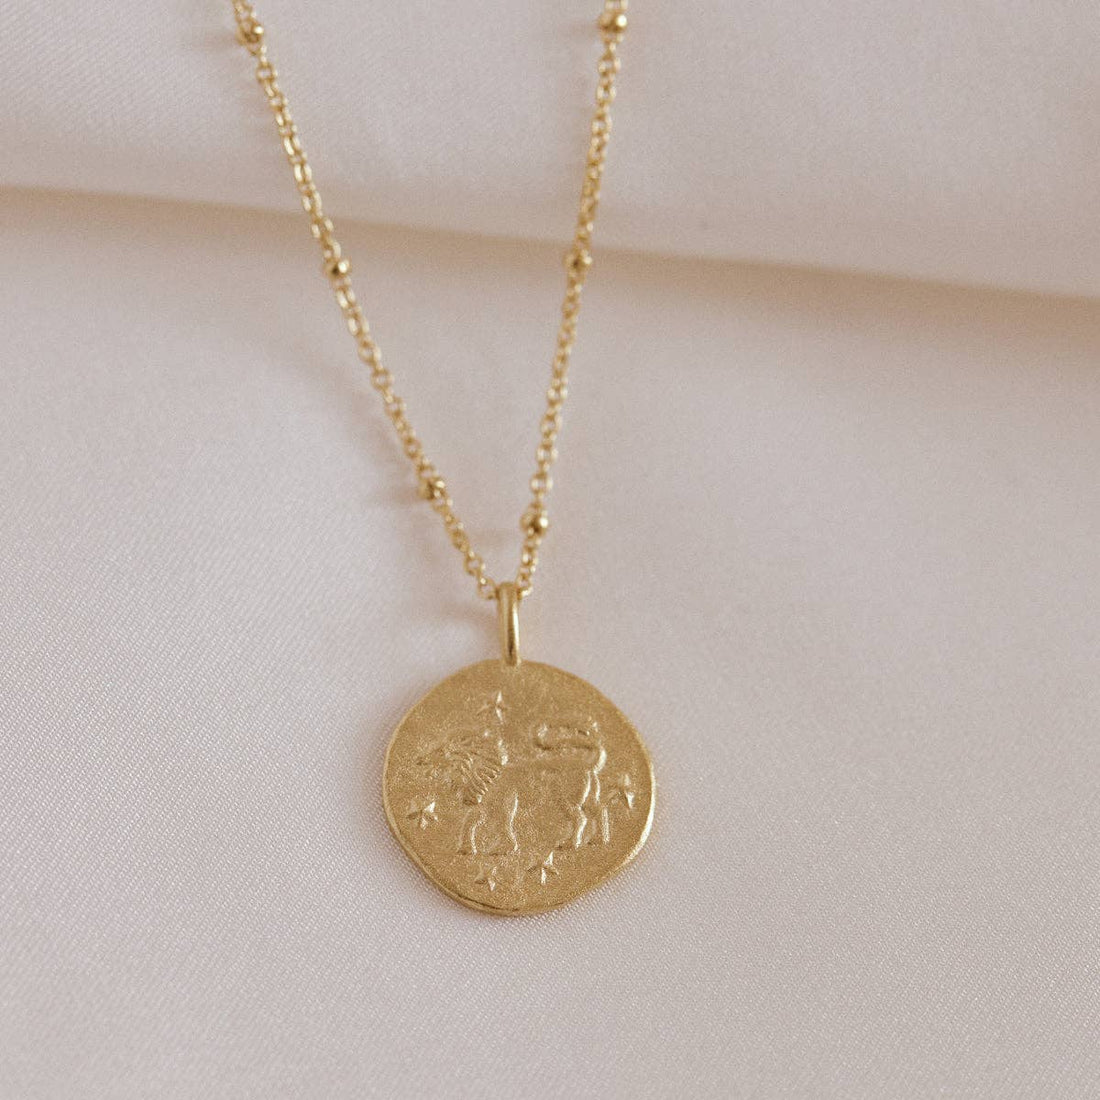 Leo Necklace | Jewelry Gold Gift Waterproof